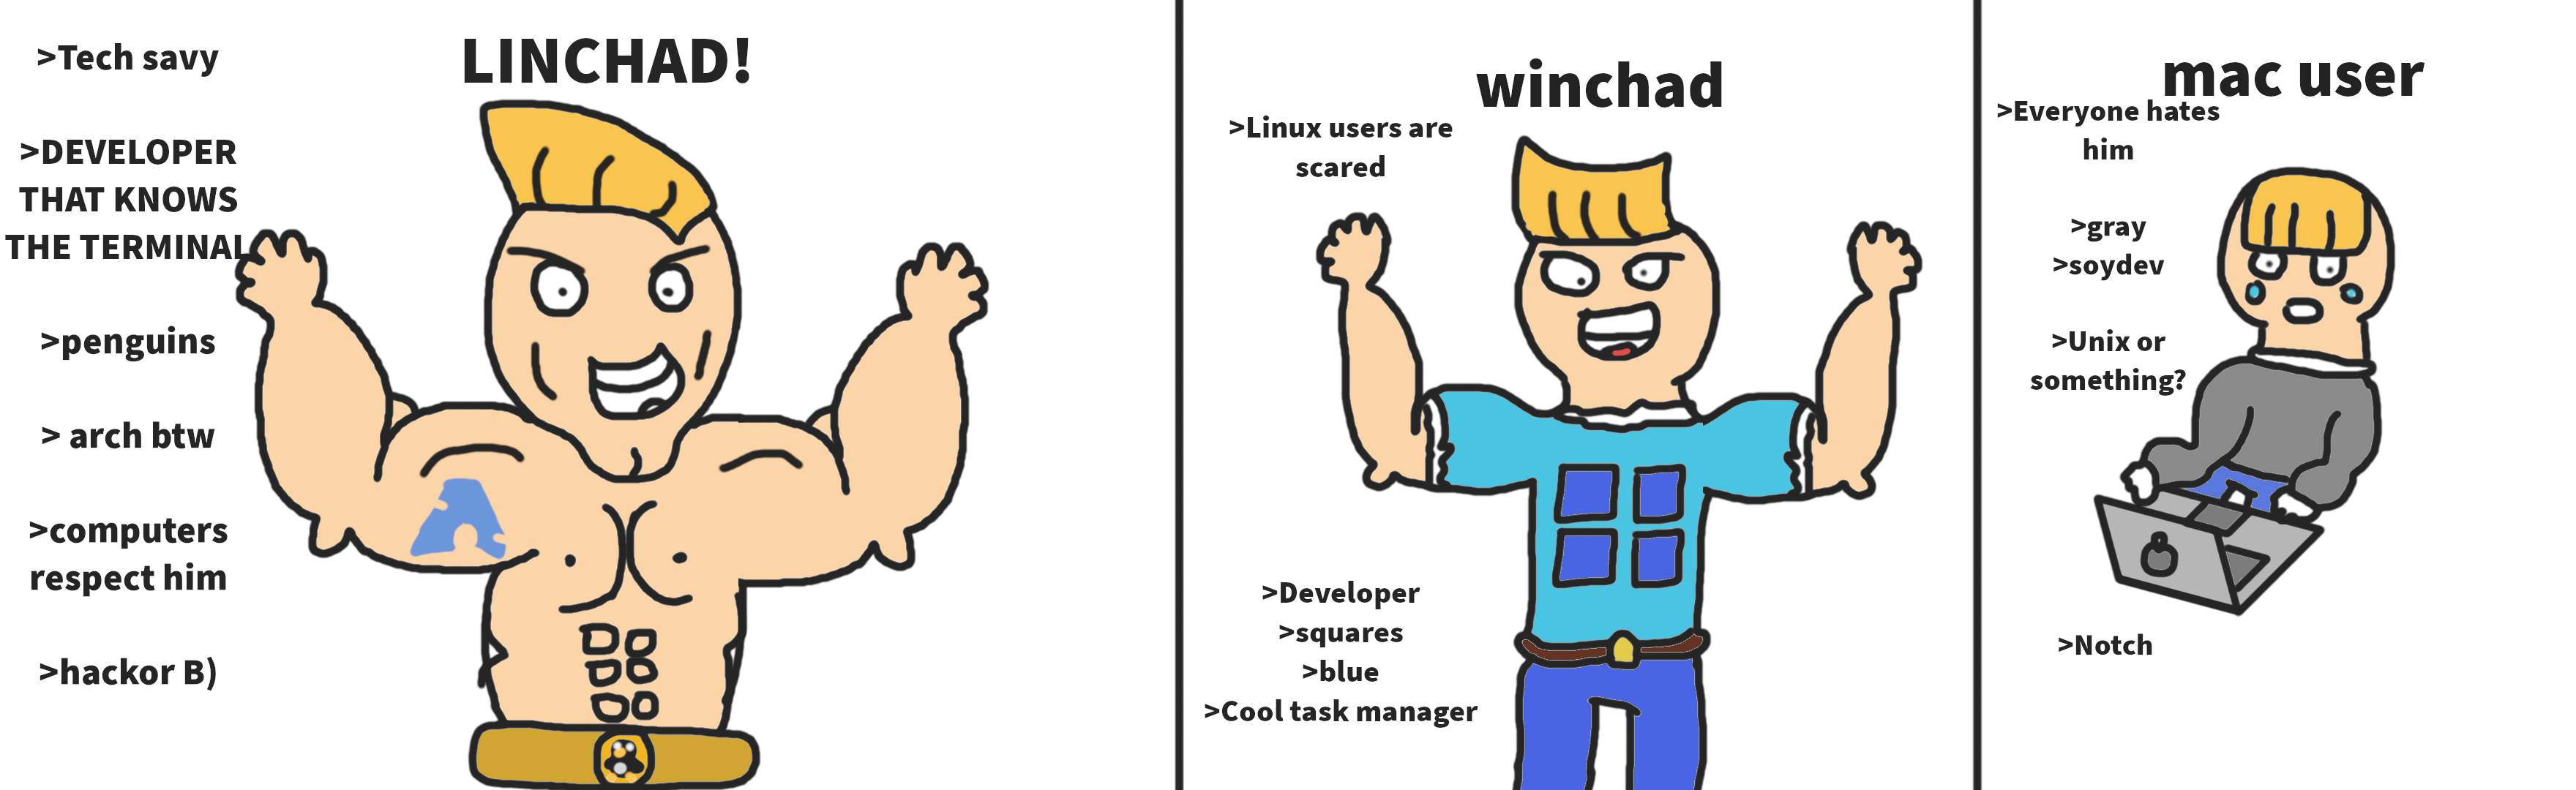 ./images/winchad-evelution.png